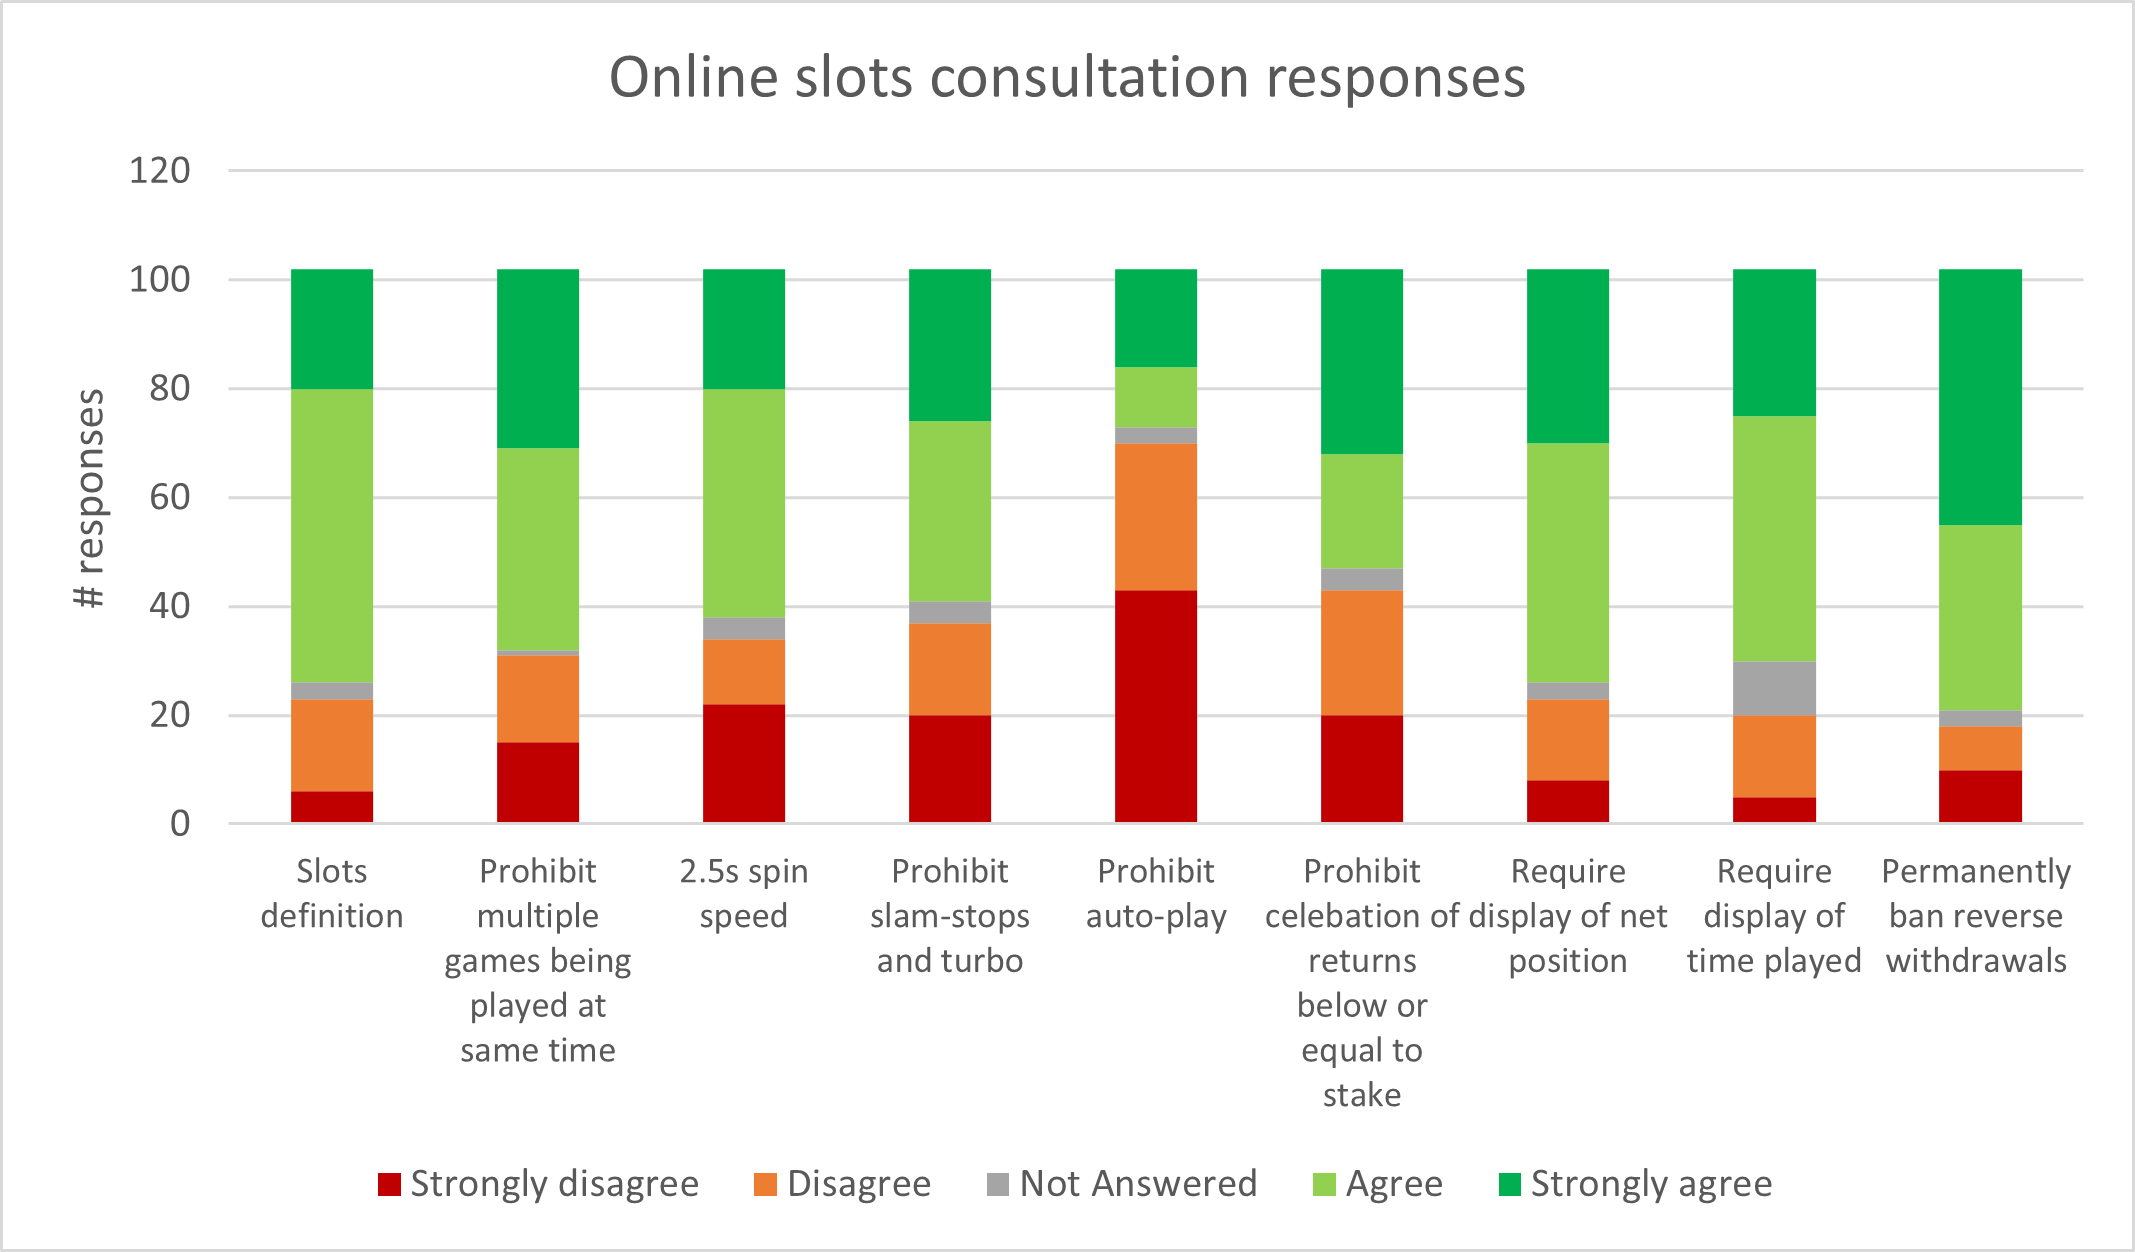 Chart - Online slots consultation responses -  The chart shows whether participants agreed or disagreed with the responses within the consultation and the extent to which they agree or disagree.